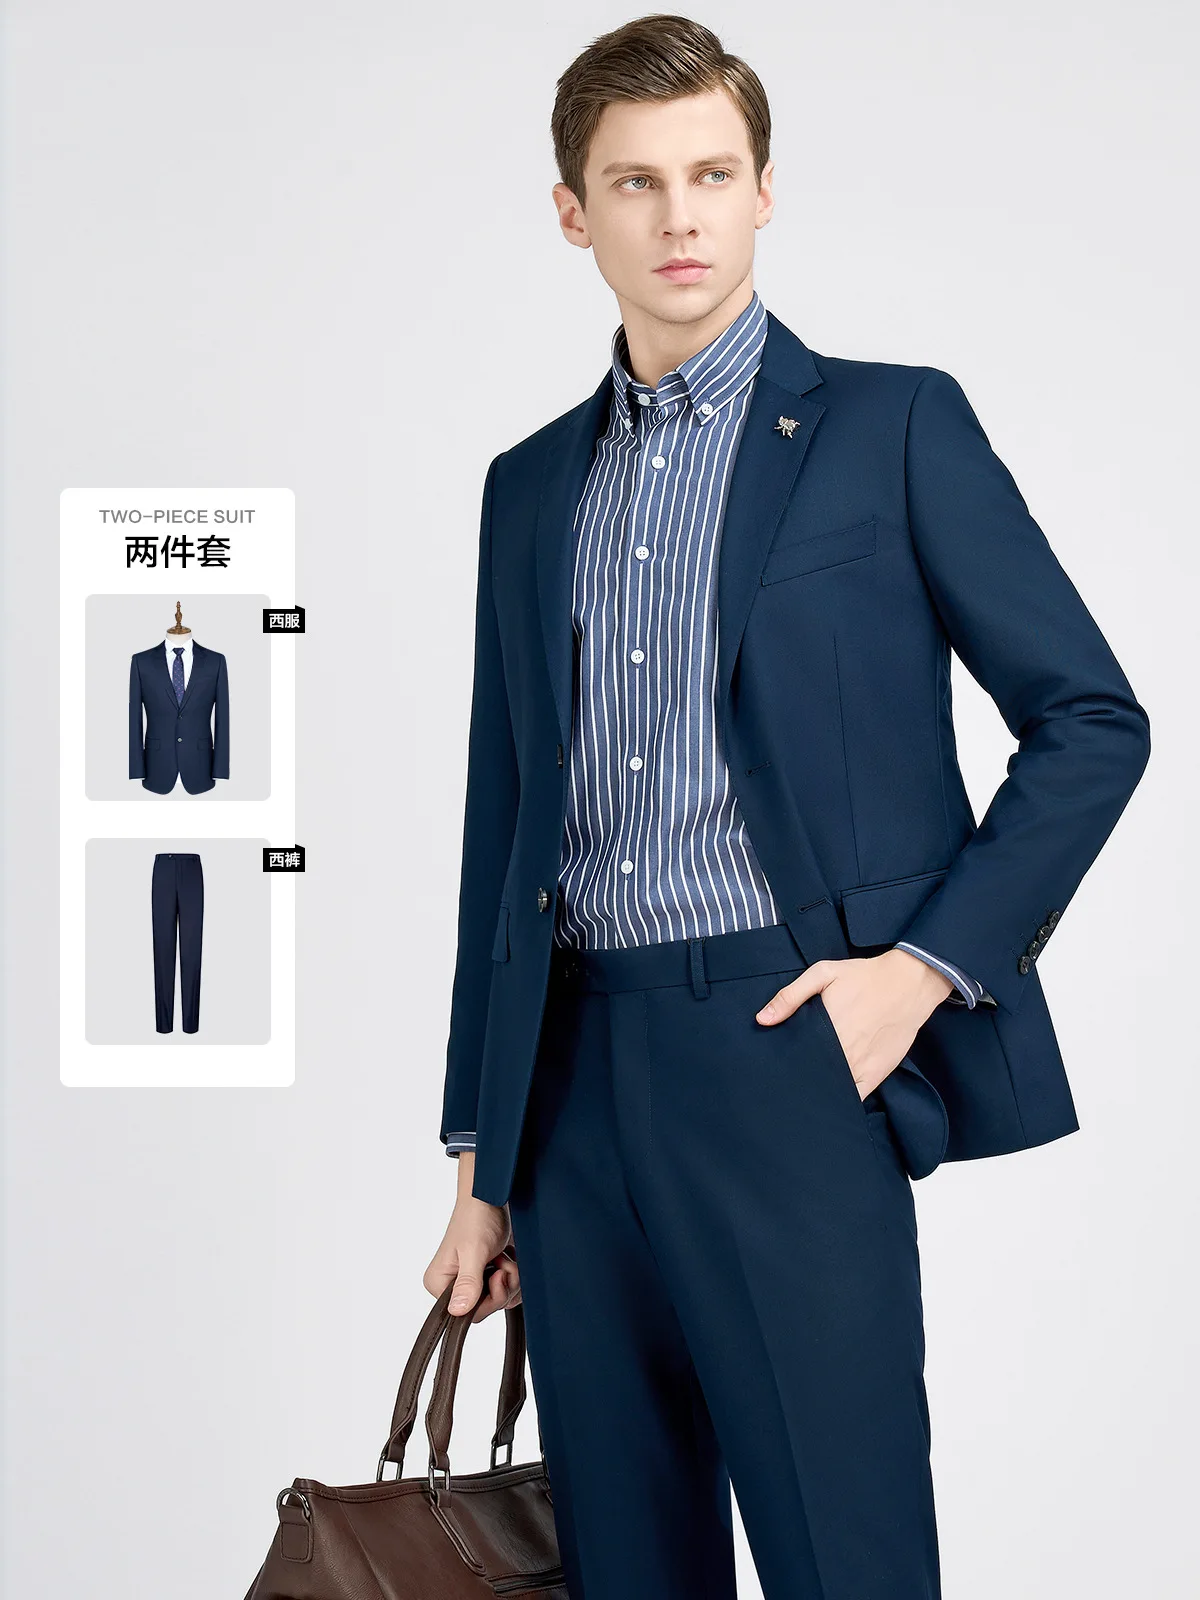 

Men's High-quality Suit Business Professional Youth Office Worker Formal Dress Wedding Banquet Gentleman Suit Dress Two-piece